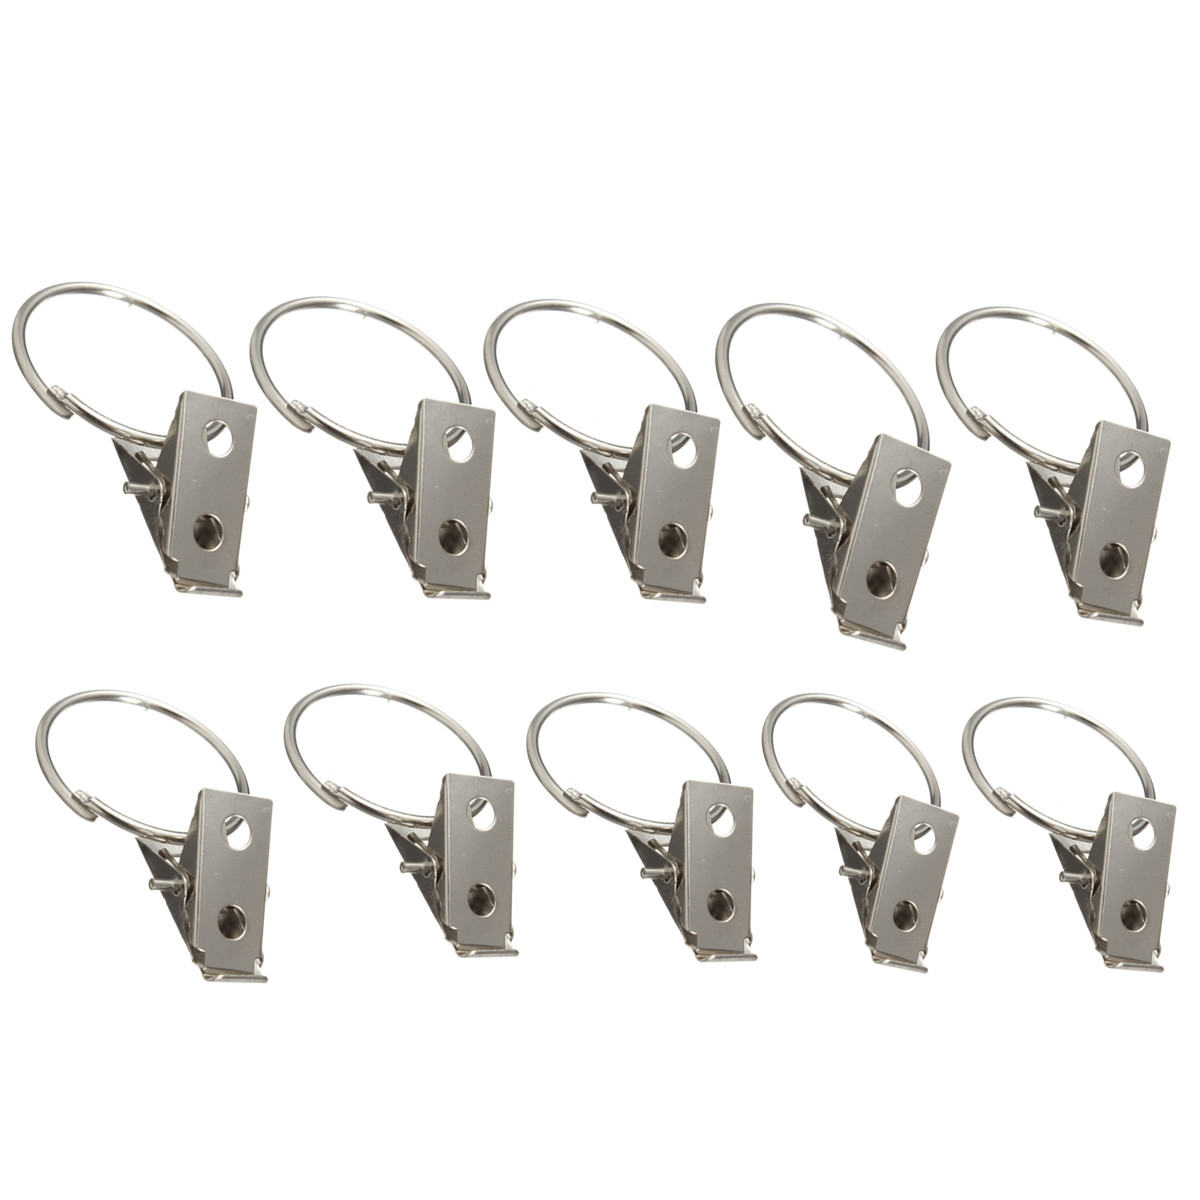 10pcs-Silver-Chrome-Window-Curtain-Clips-Rings-Pole-Rod-Voile-Drapery-1025287